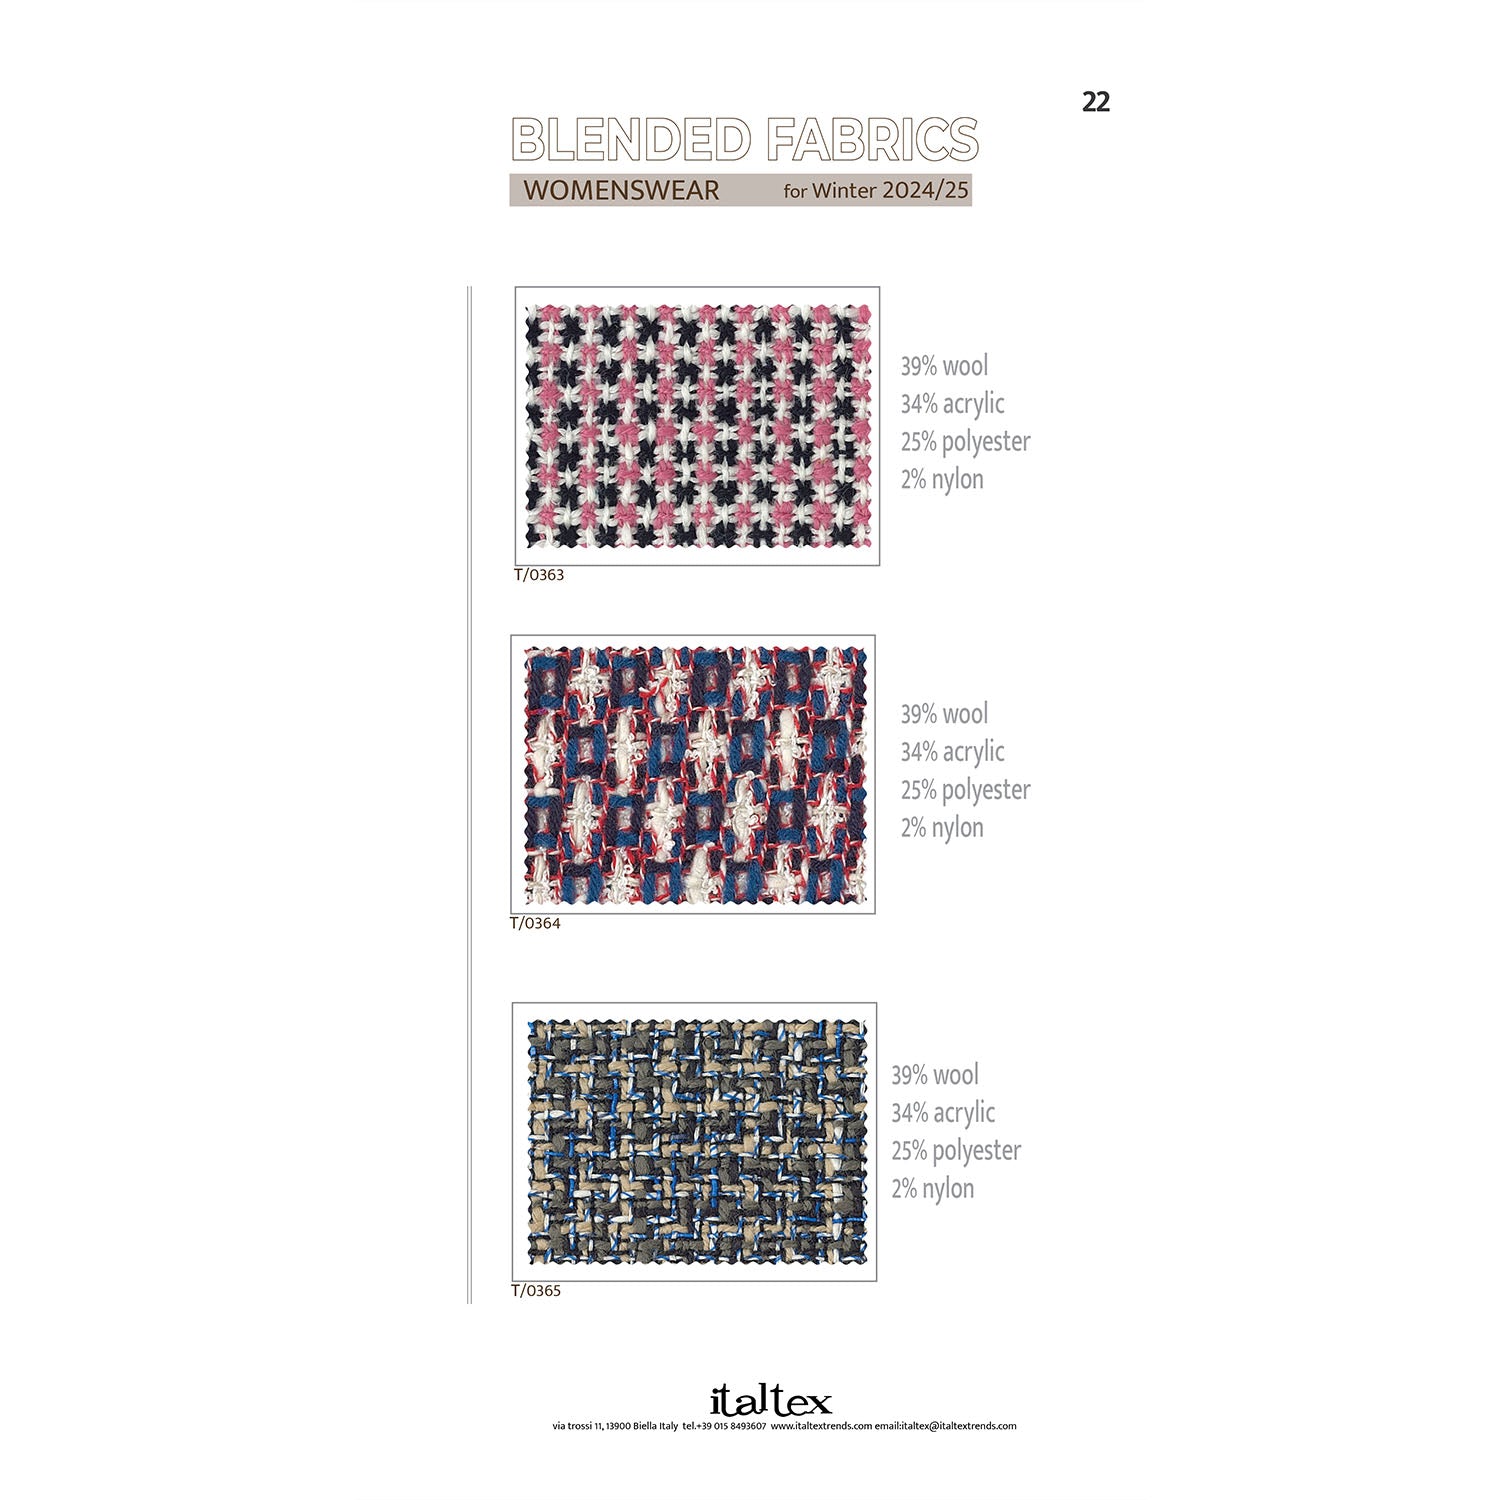 Three women's wear fancy fabric swatches in cool, acrylic, polyester and nylon. A black, white and pink stars pattern. A white, blue and red coarse tweed. A light and medium grey plus blue fancy yarn tweed